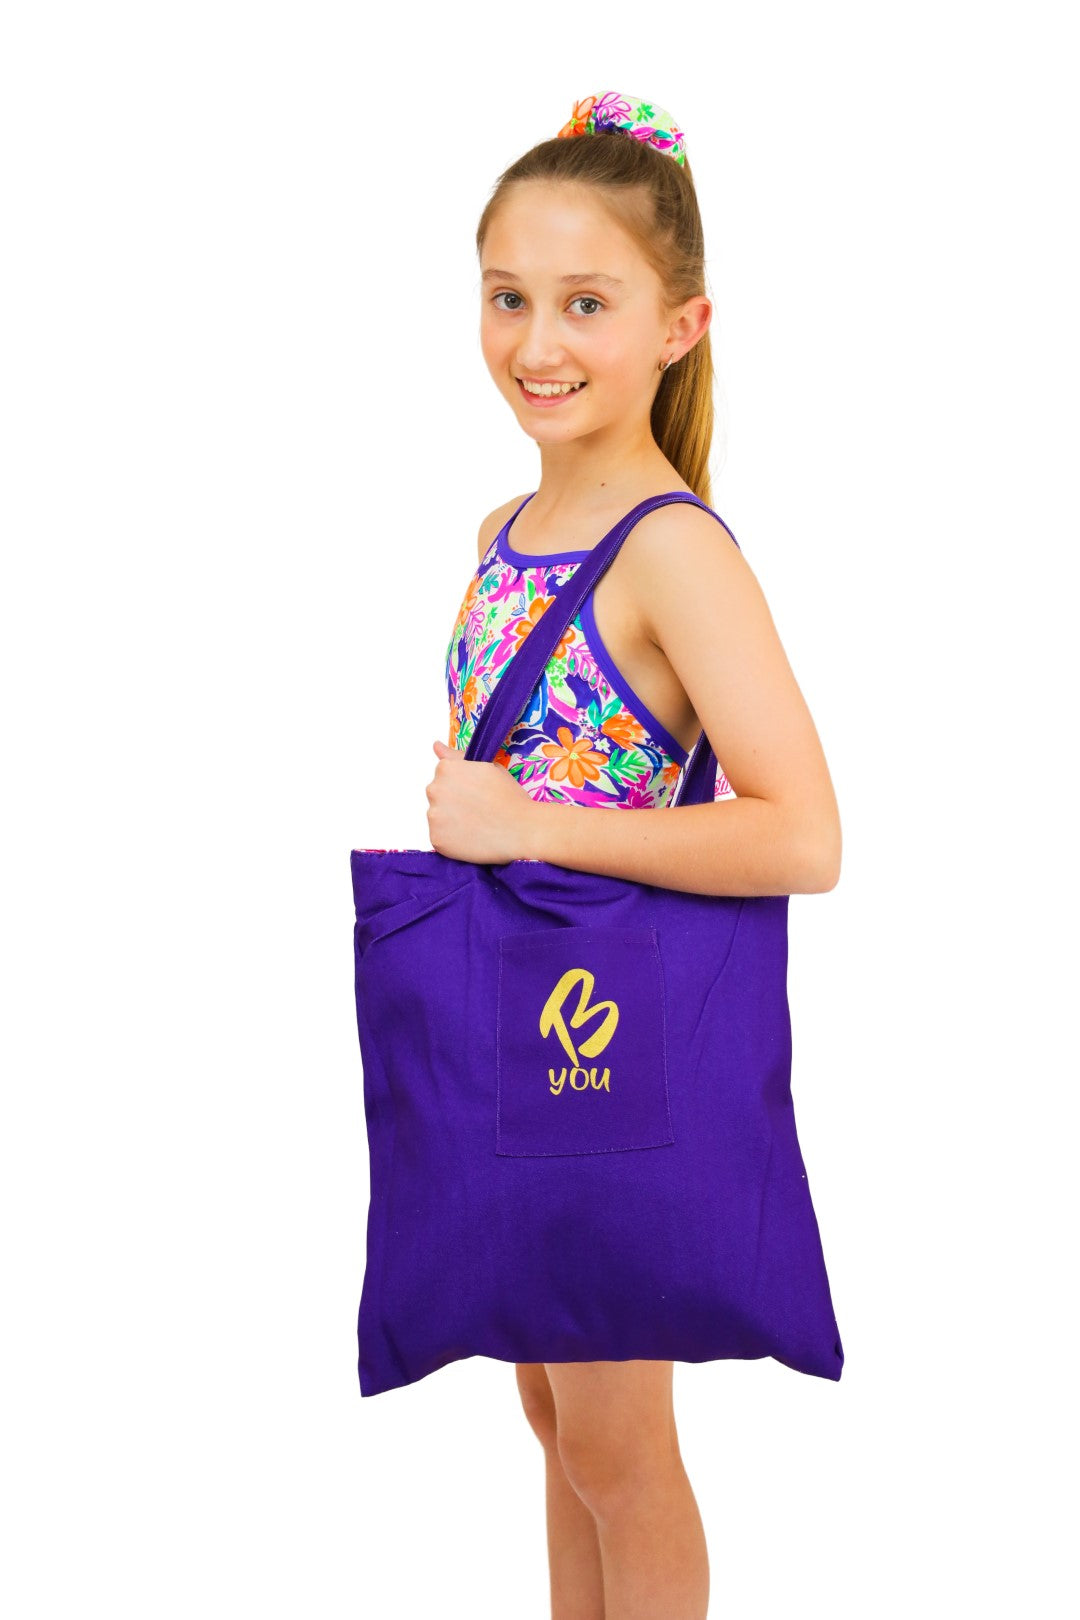 Purple and Tropical Canvas Tote Bag. Reversible. Features Green, Purple and Orange Tropical Print. Perfect for Active and Sporty Girls. B you Active, B you Leotards, B you Swimwear for girls. Activewear for kids. Gymnastics and Dancewear. Leotards and Sports.